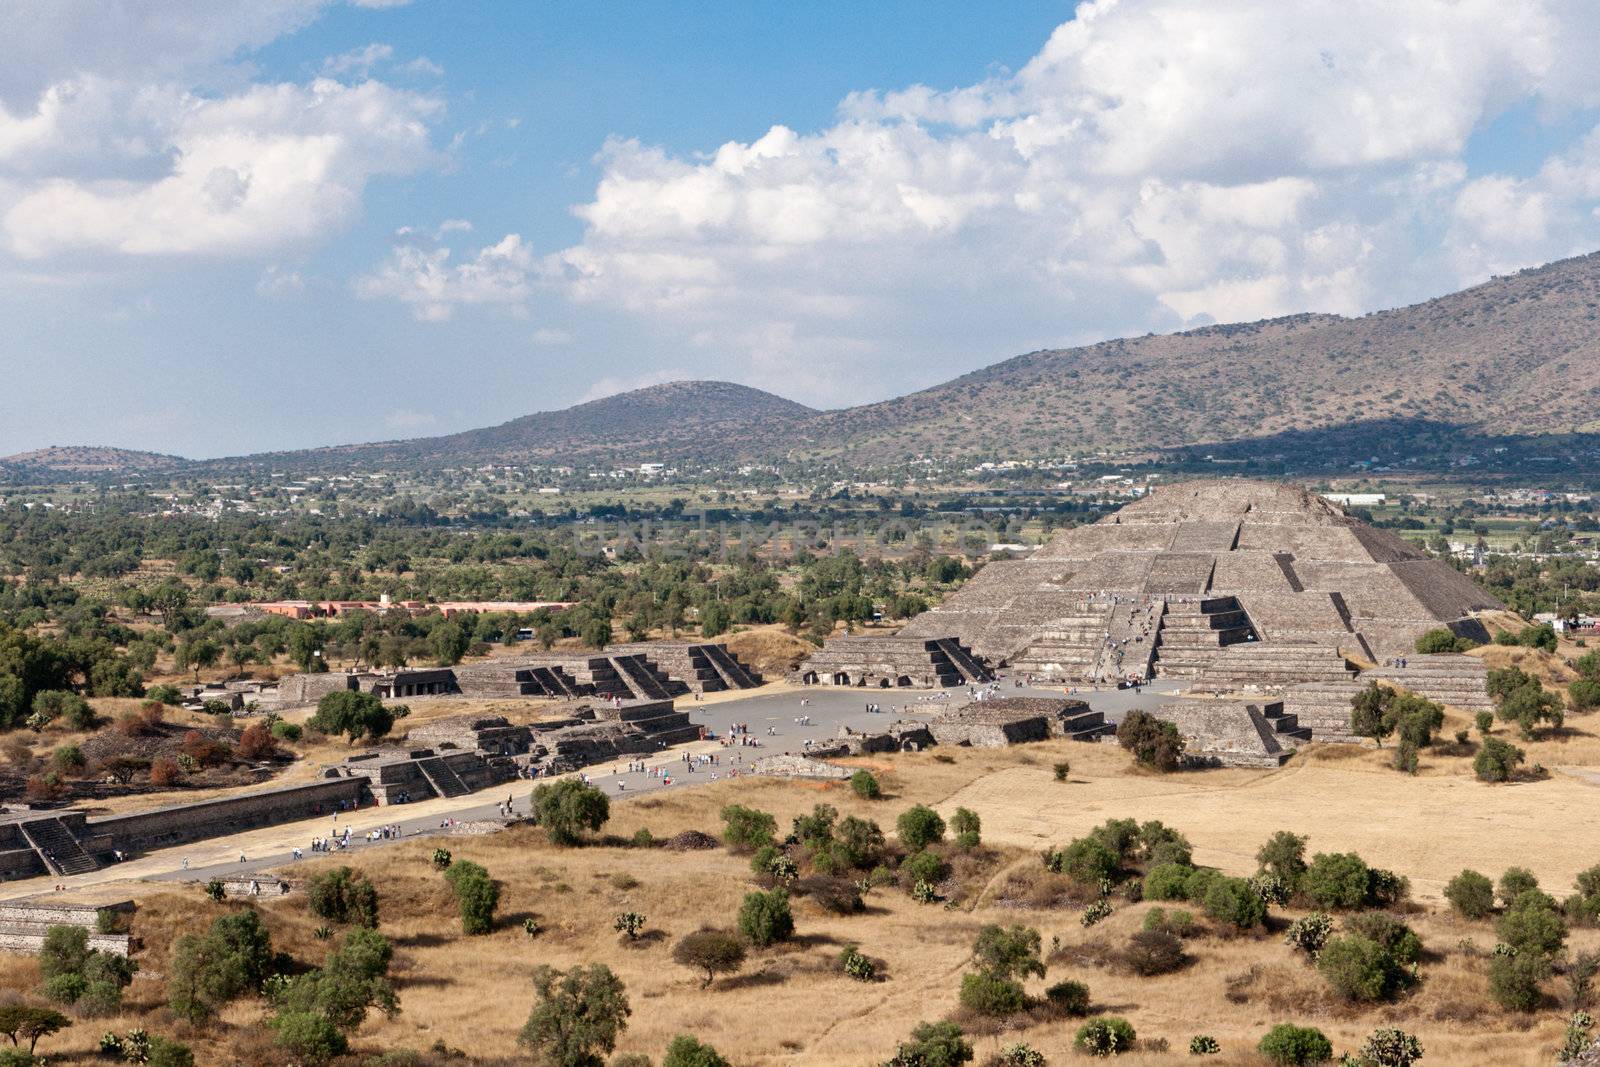 Pyramid of the Moon. View from the Pyramid of the Sun. Teotihuacan, Mexico